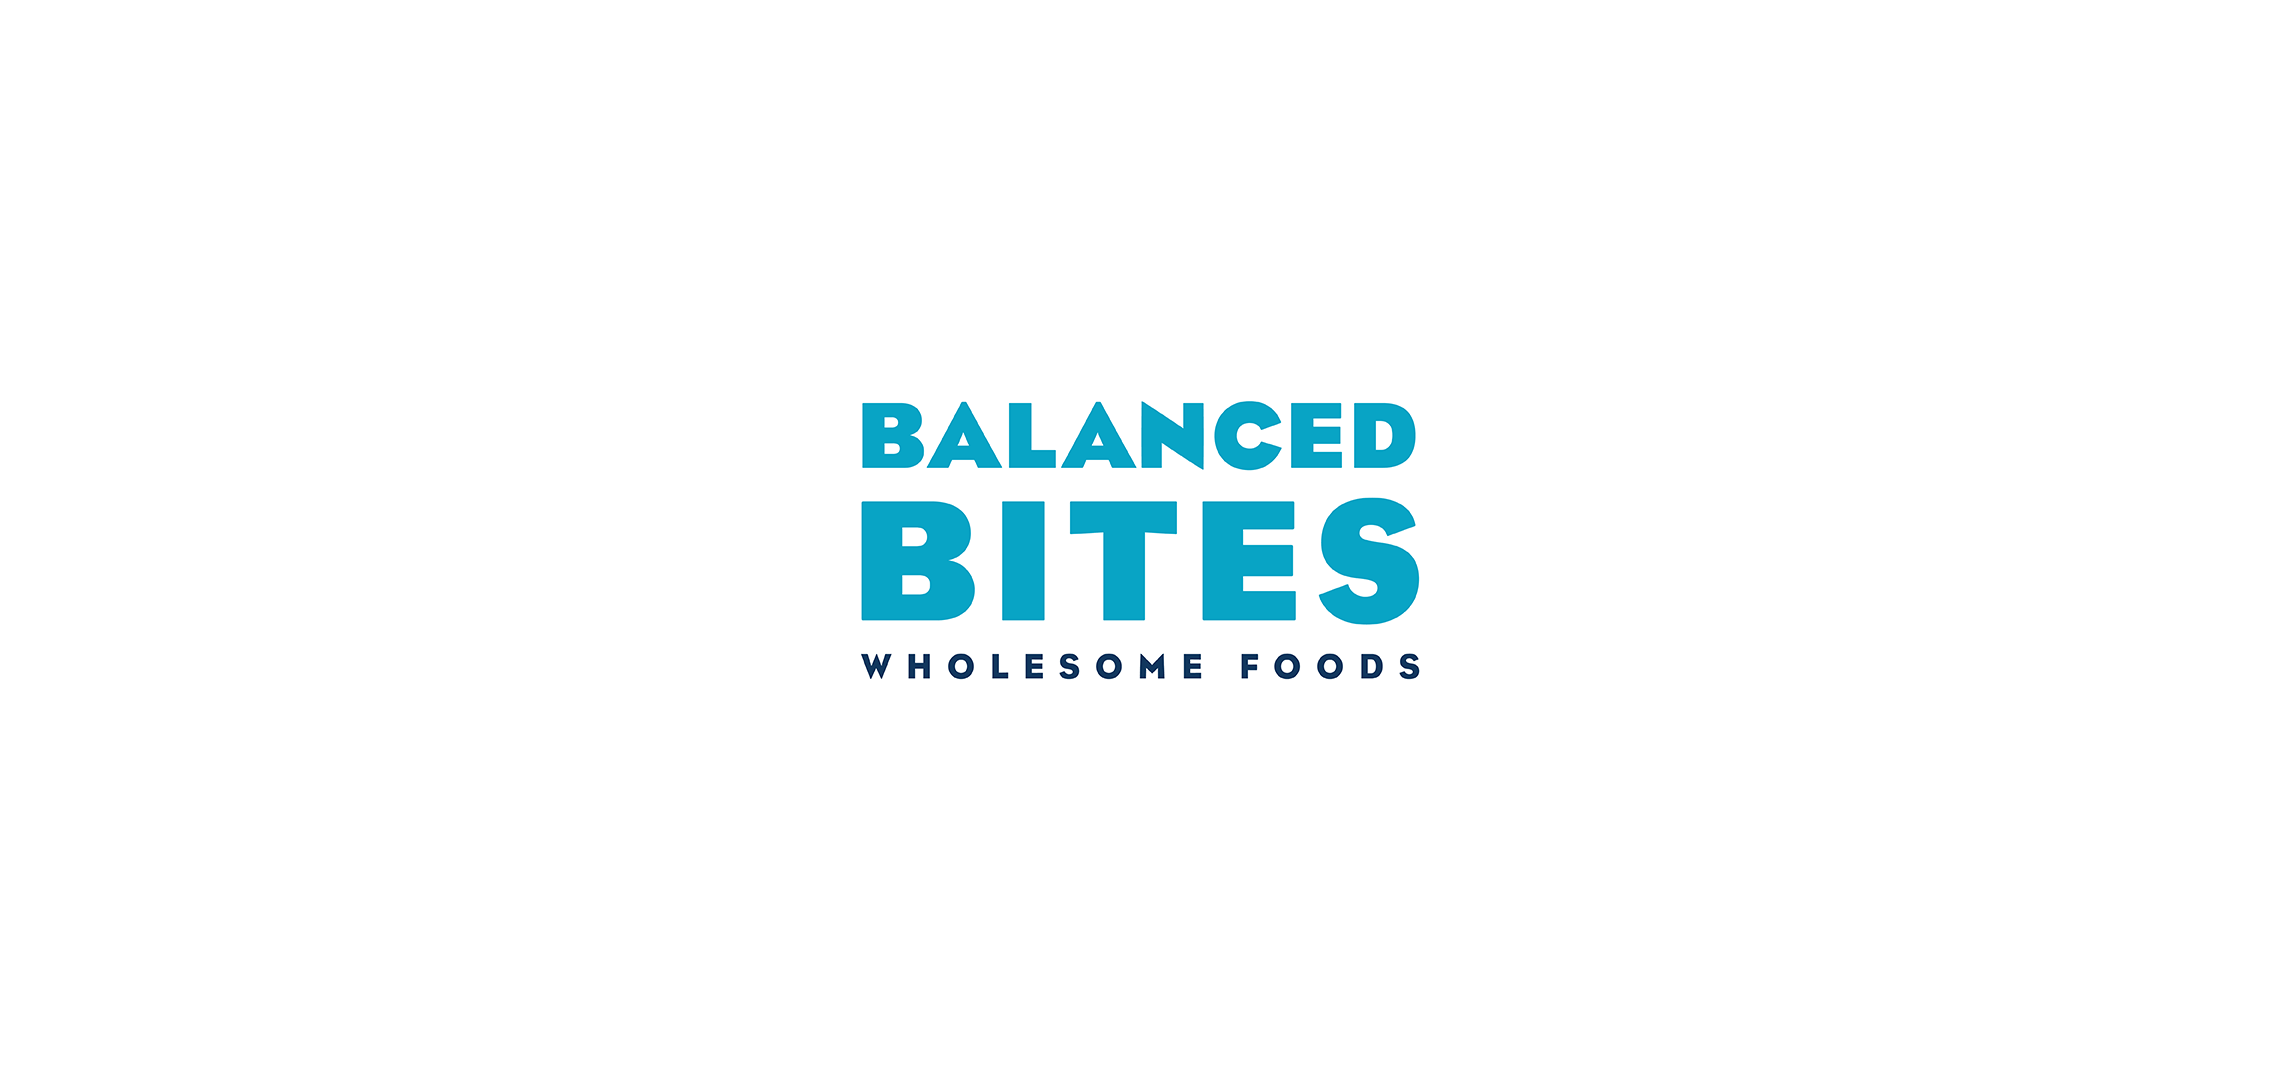 Balanced Bites Wholesome Foods: secondary logo with modern typography